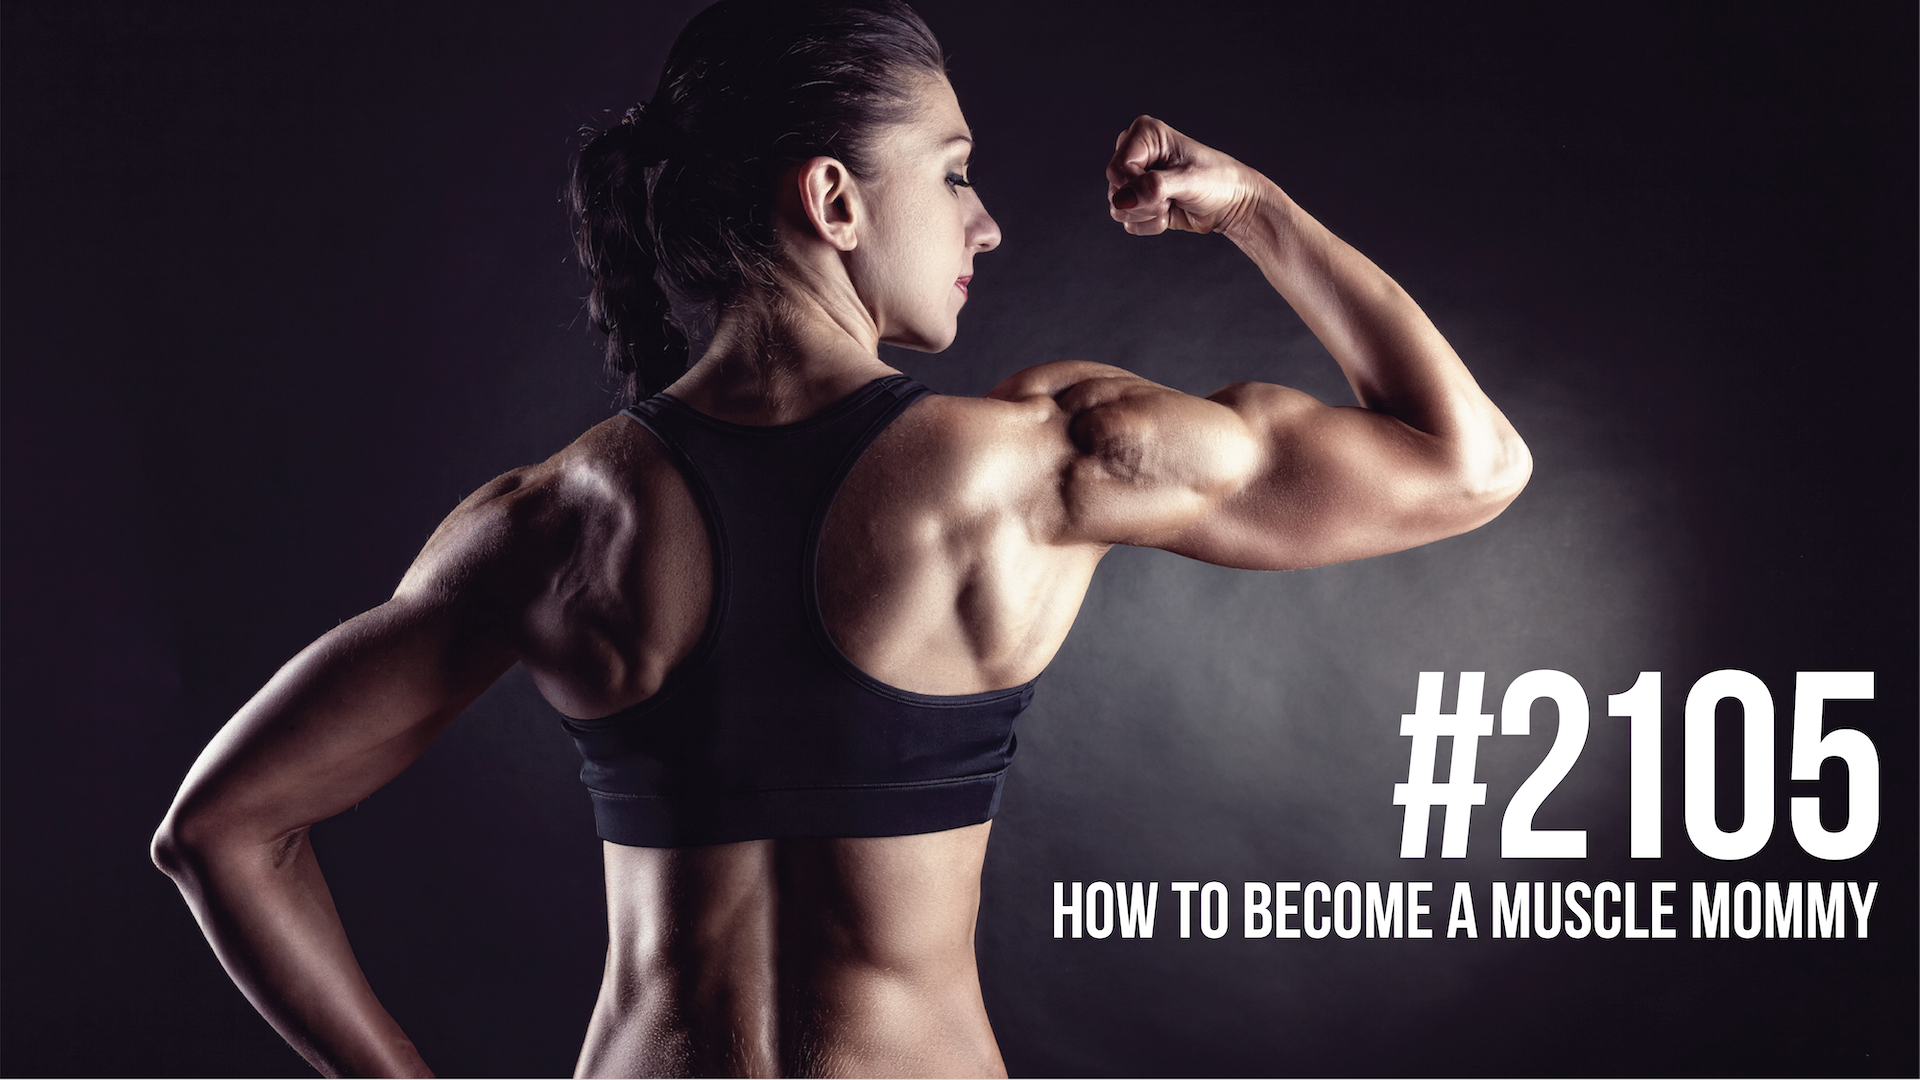 2105: How to Become a Muscle Mommy